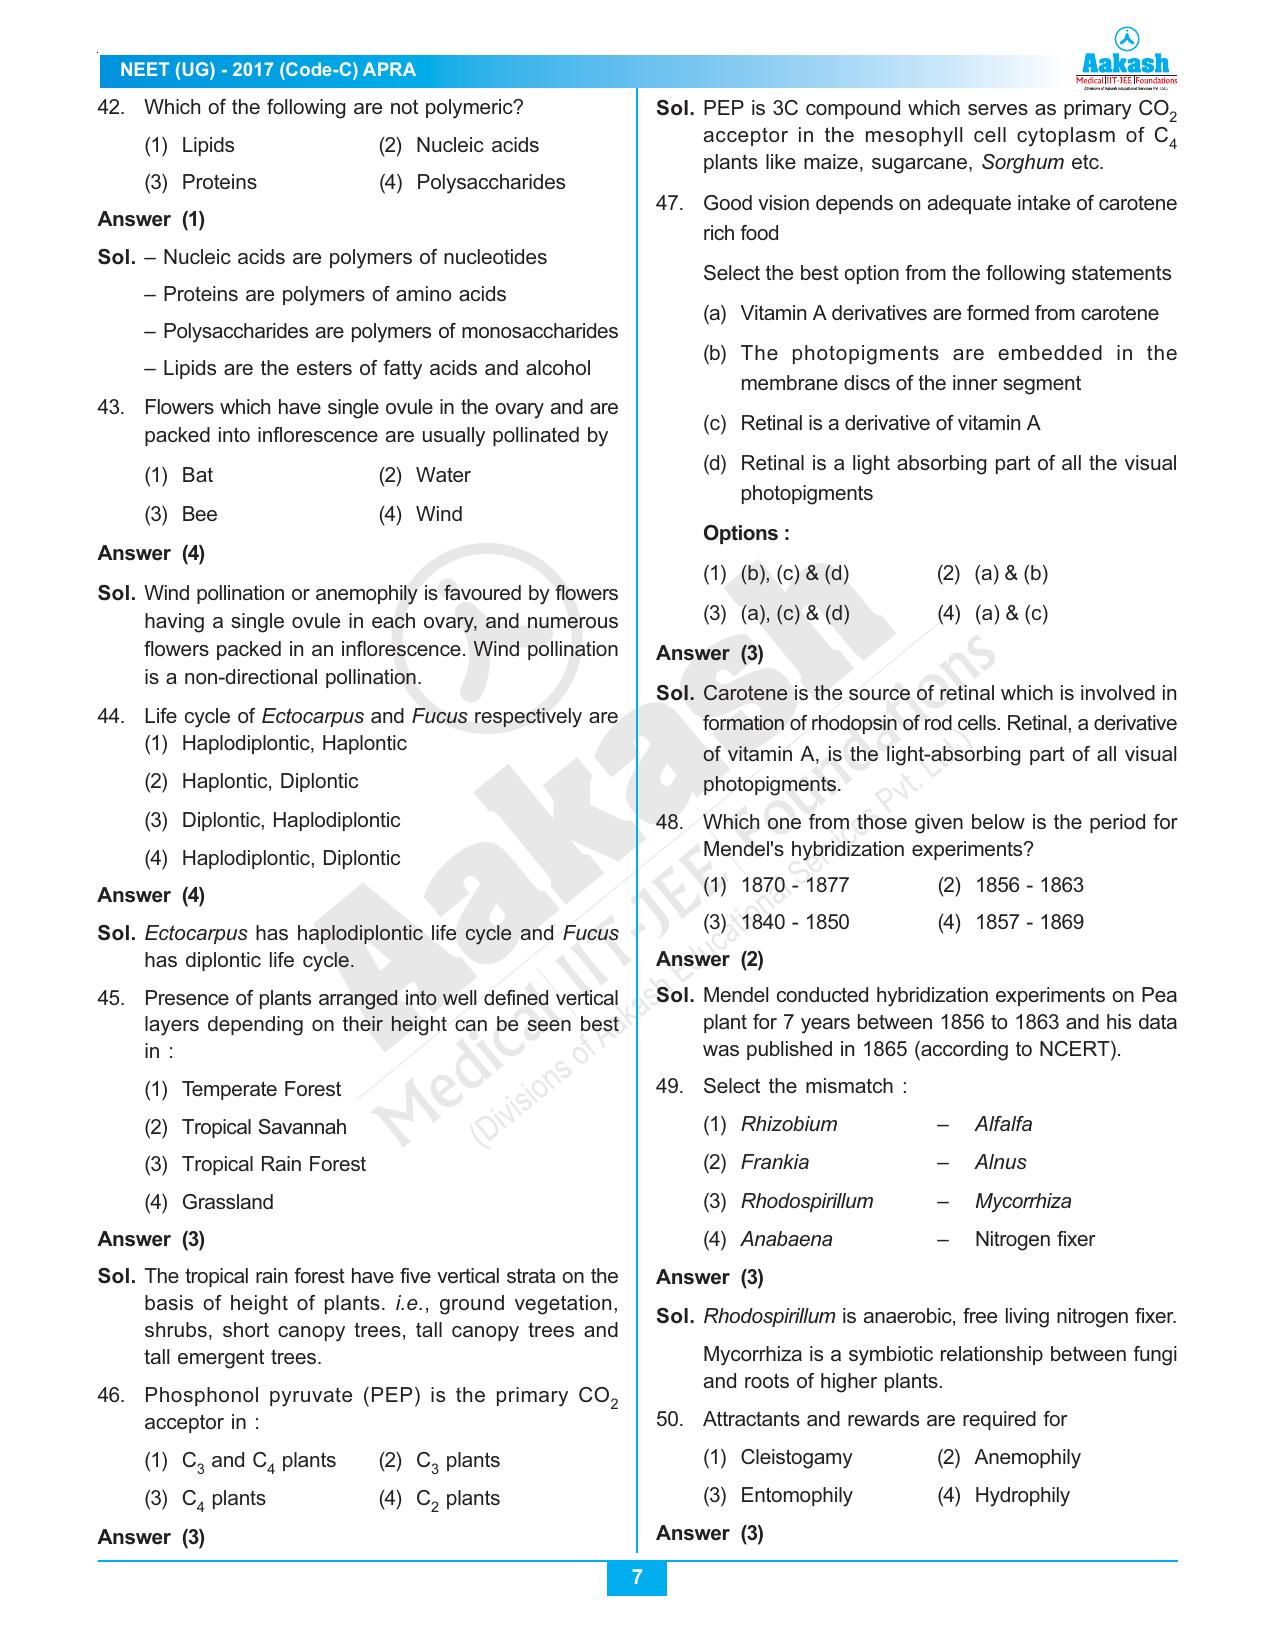  NEET Code C 2017 Answer & Solutions - Page 7